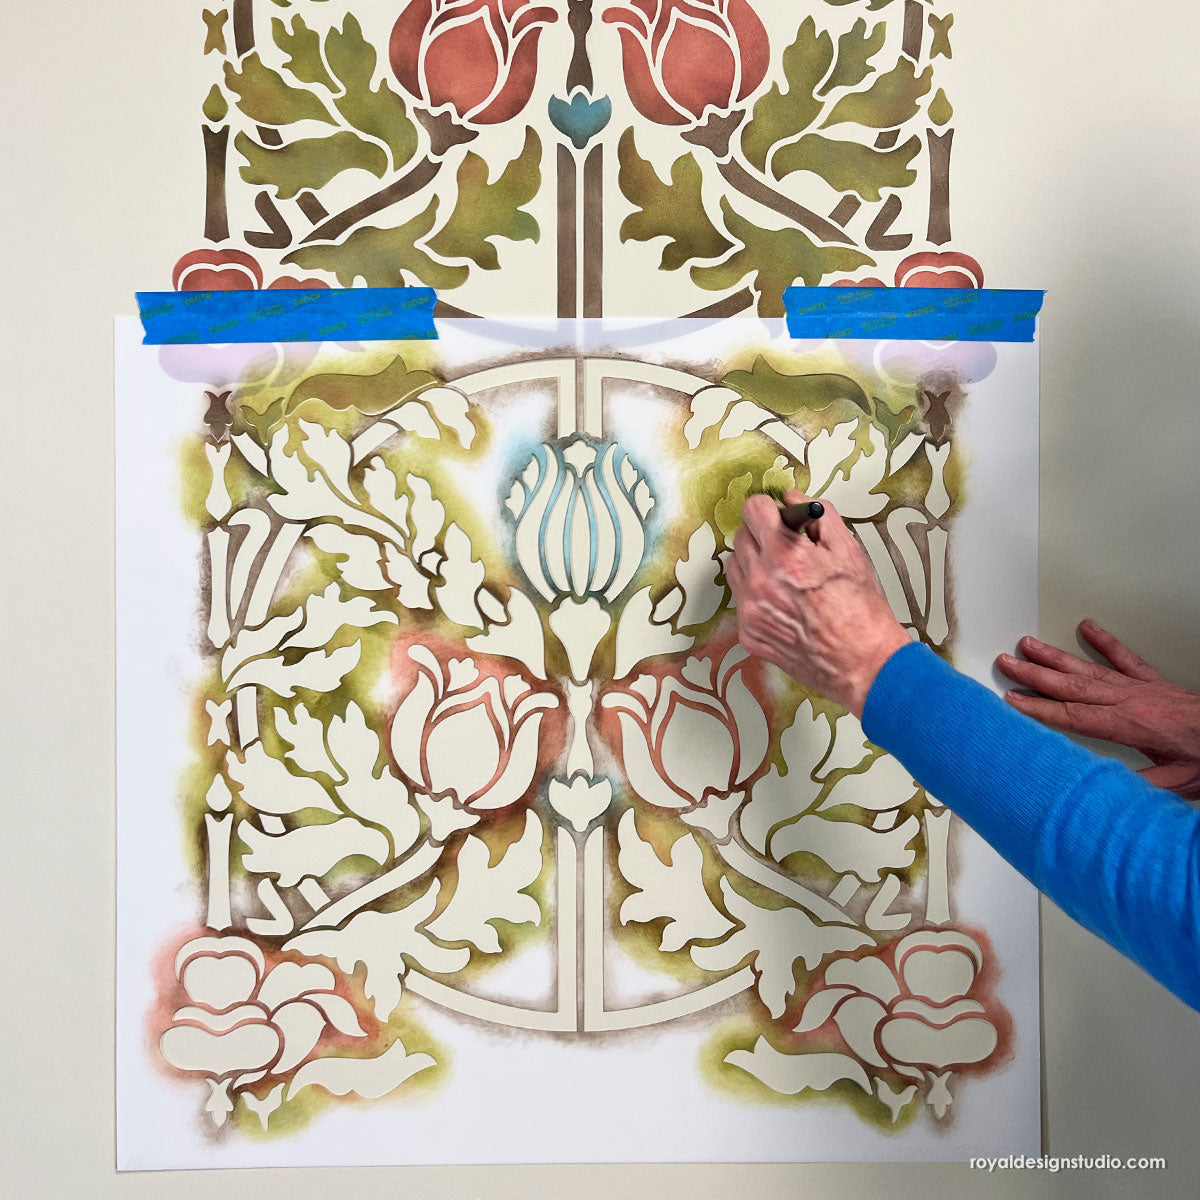 Floral wall stencils, Botanical painted stencil